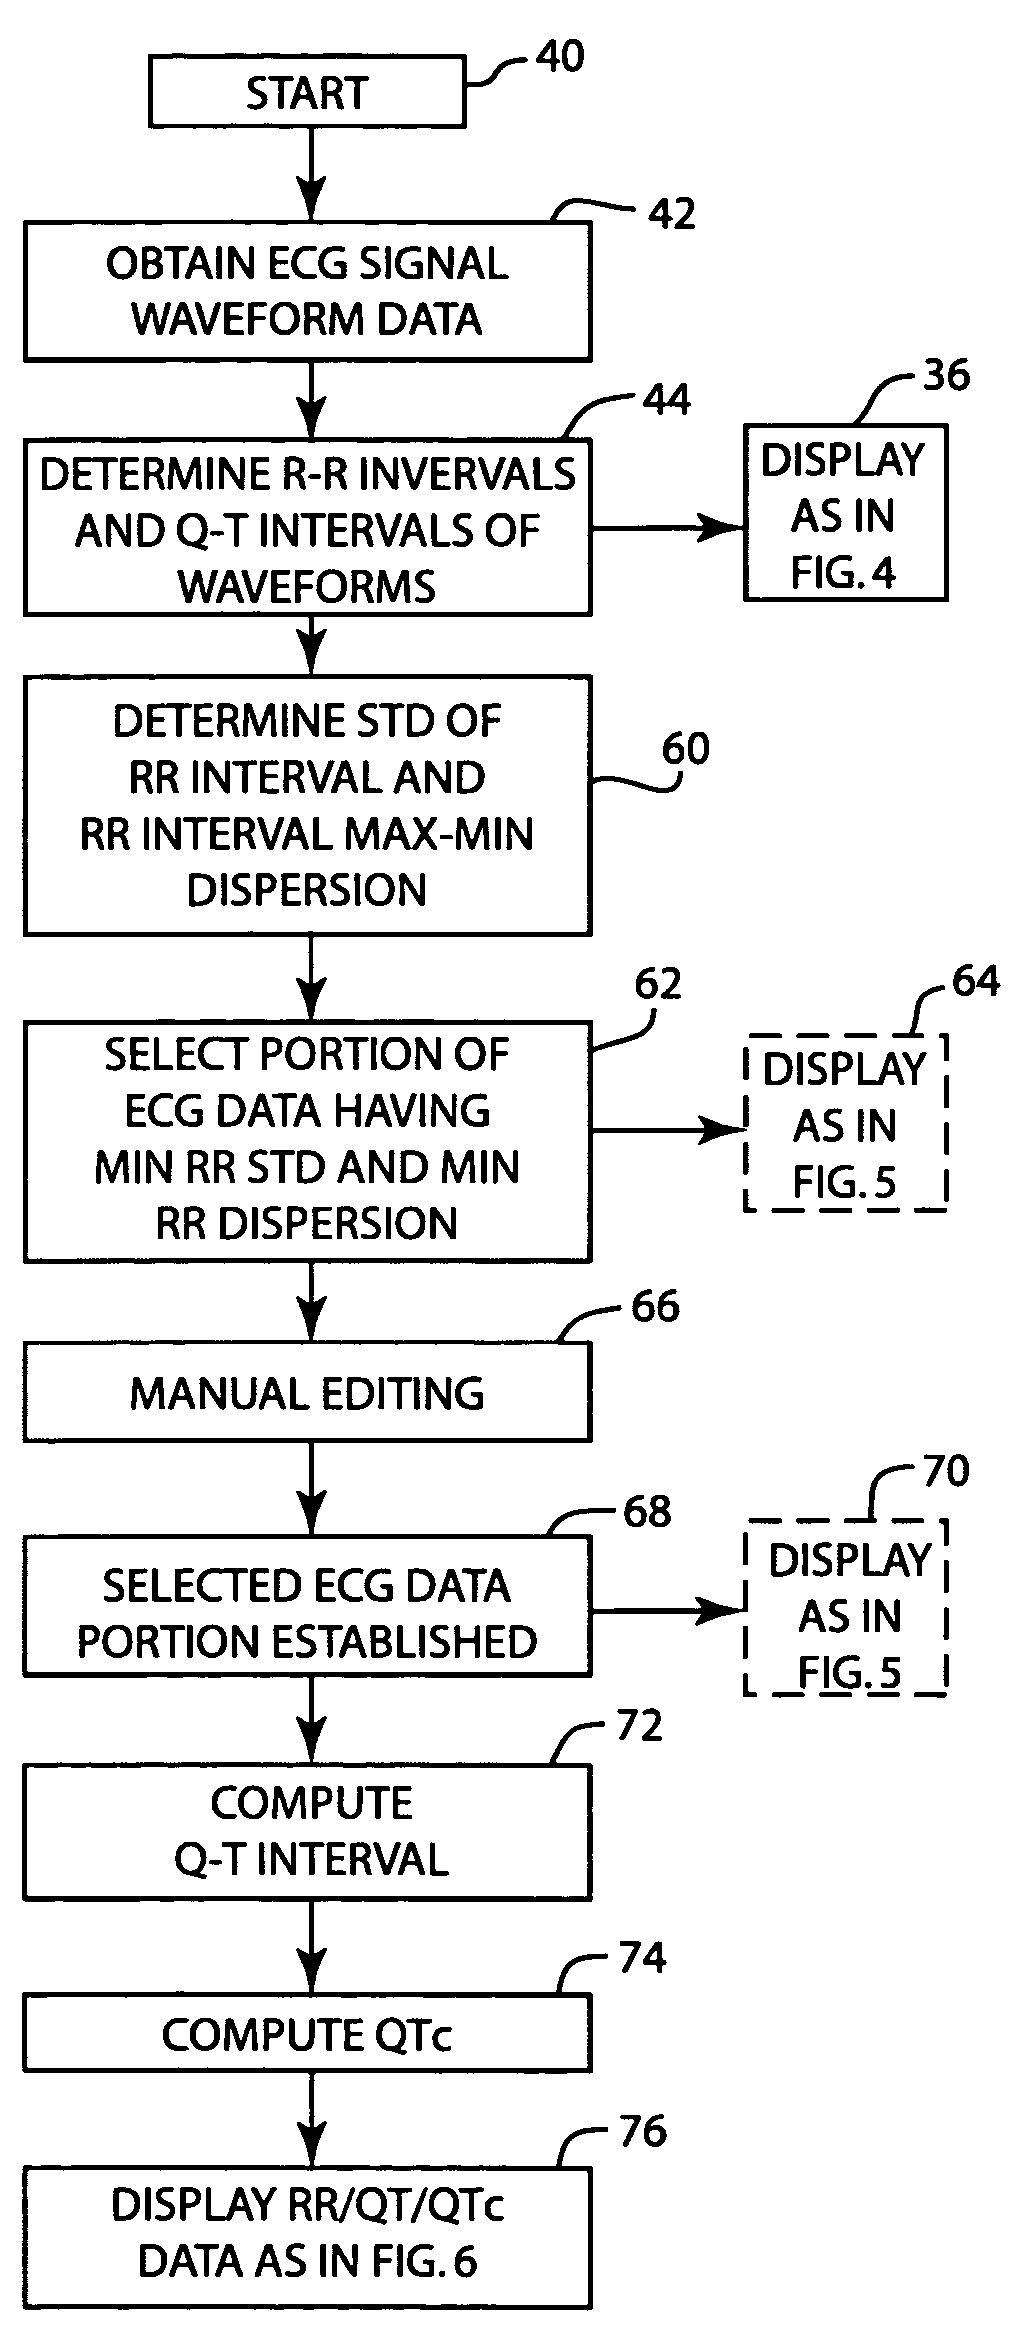 Method and apparatus for analyzing and editing ECG morphology and time series